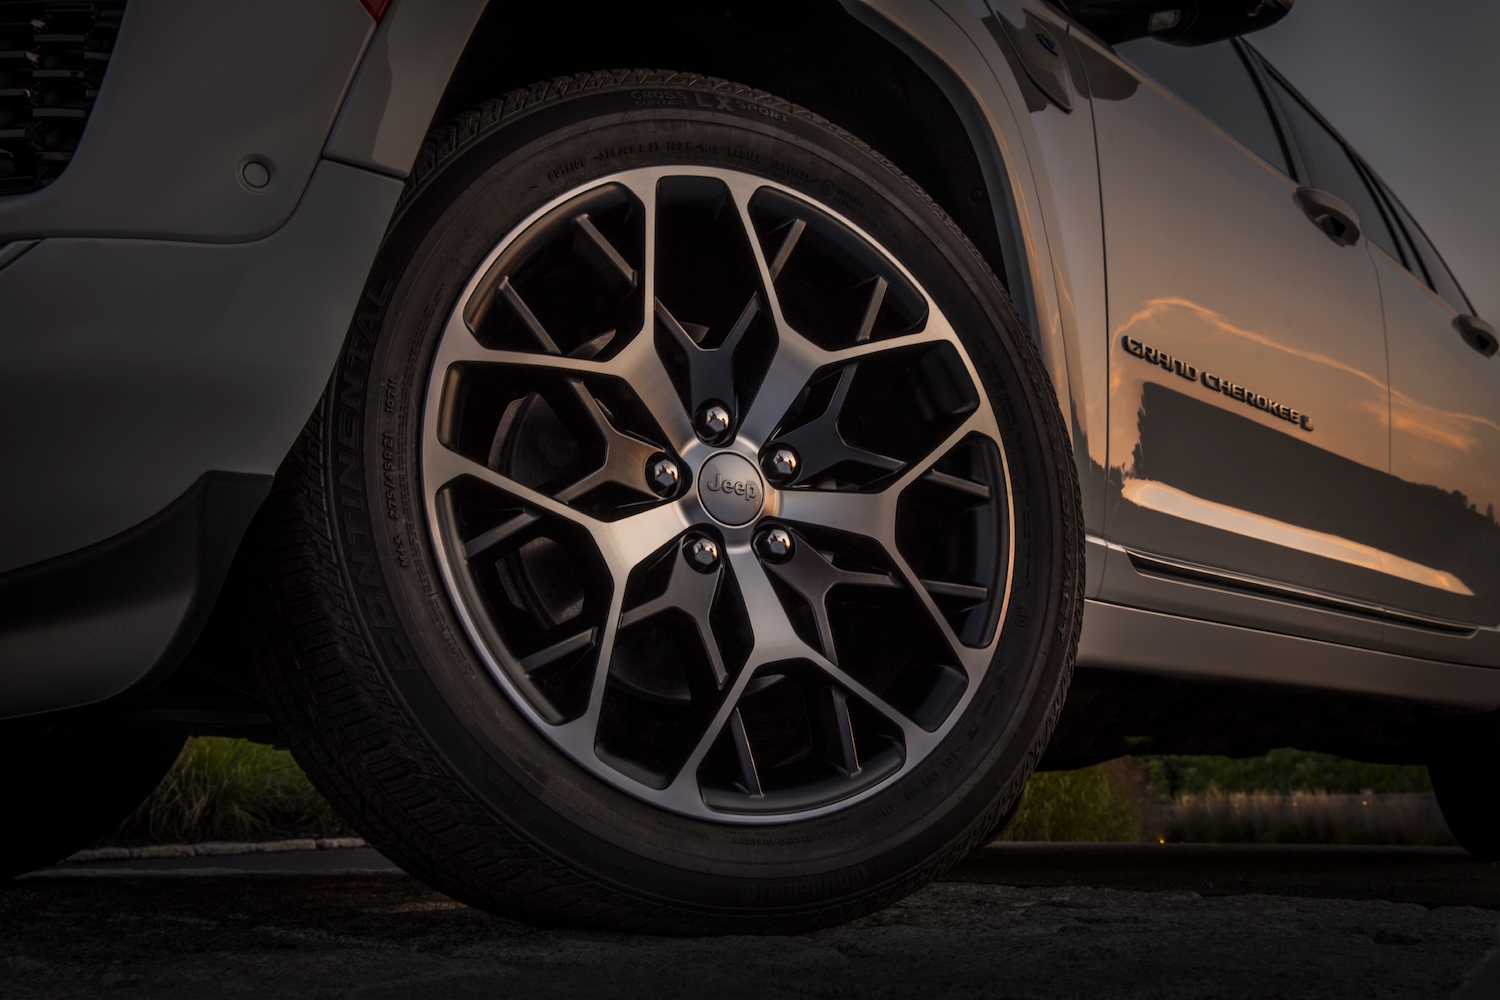 Close-up of the 20-inch wheels and low-profile tires on the Jeep Grand Cherokee Summit Reserve.